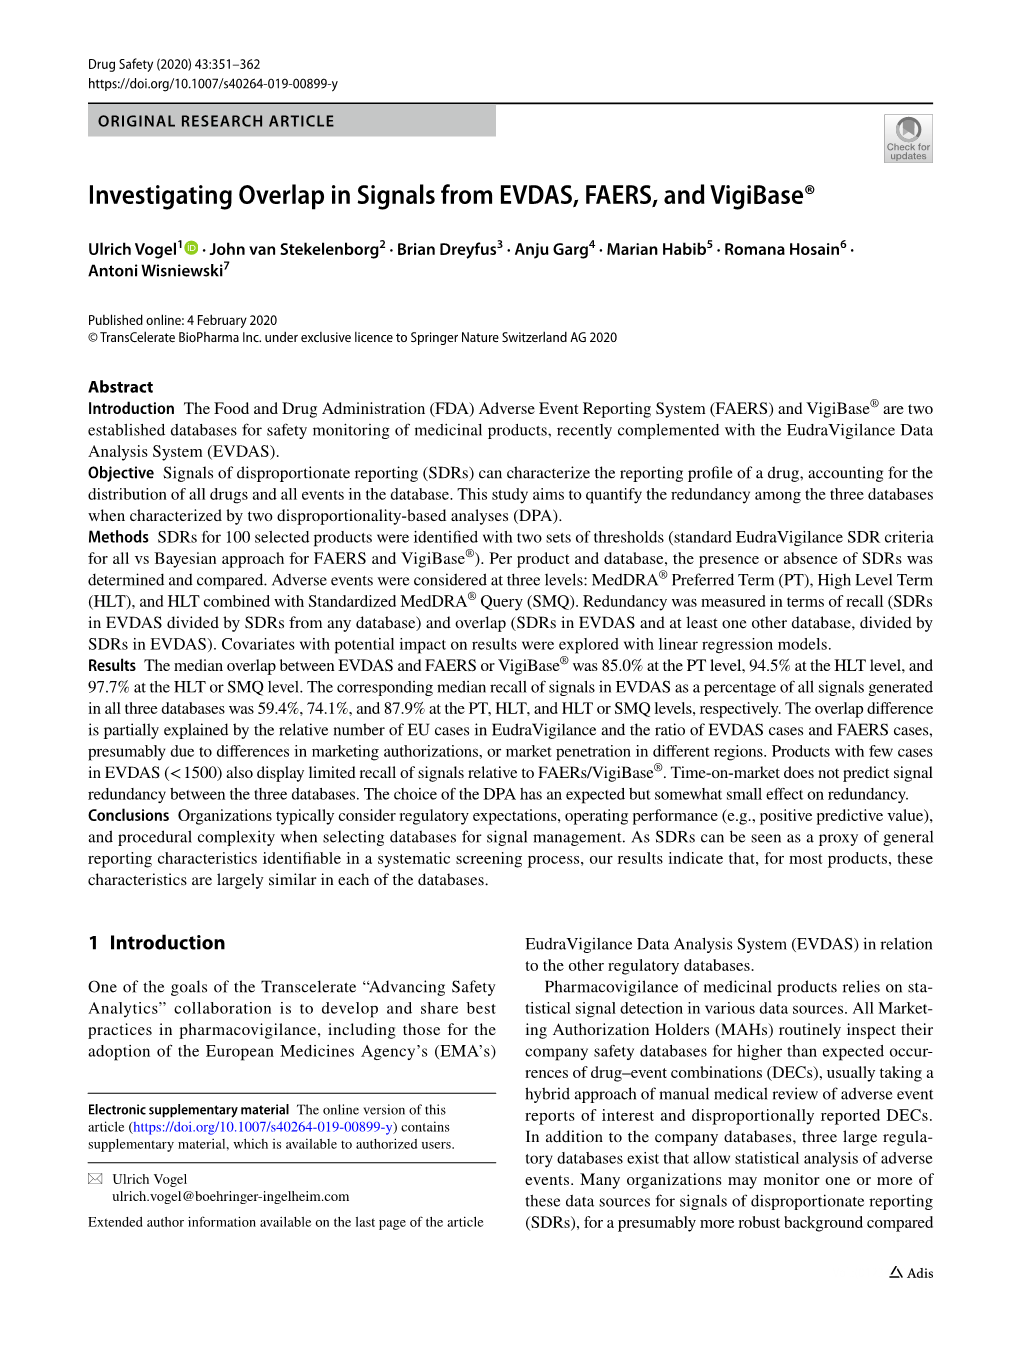 Investigating Overlap in Signals from EVDAS, FAERS, and Vigibase®